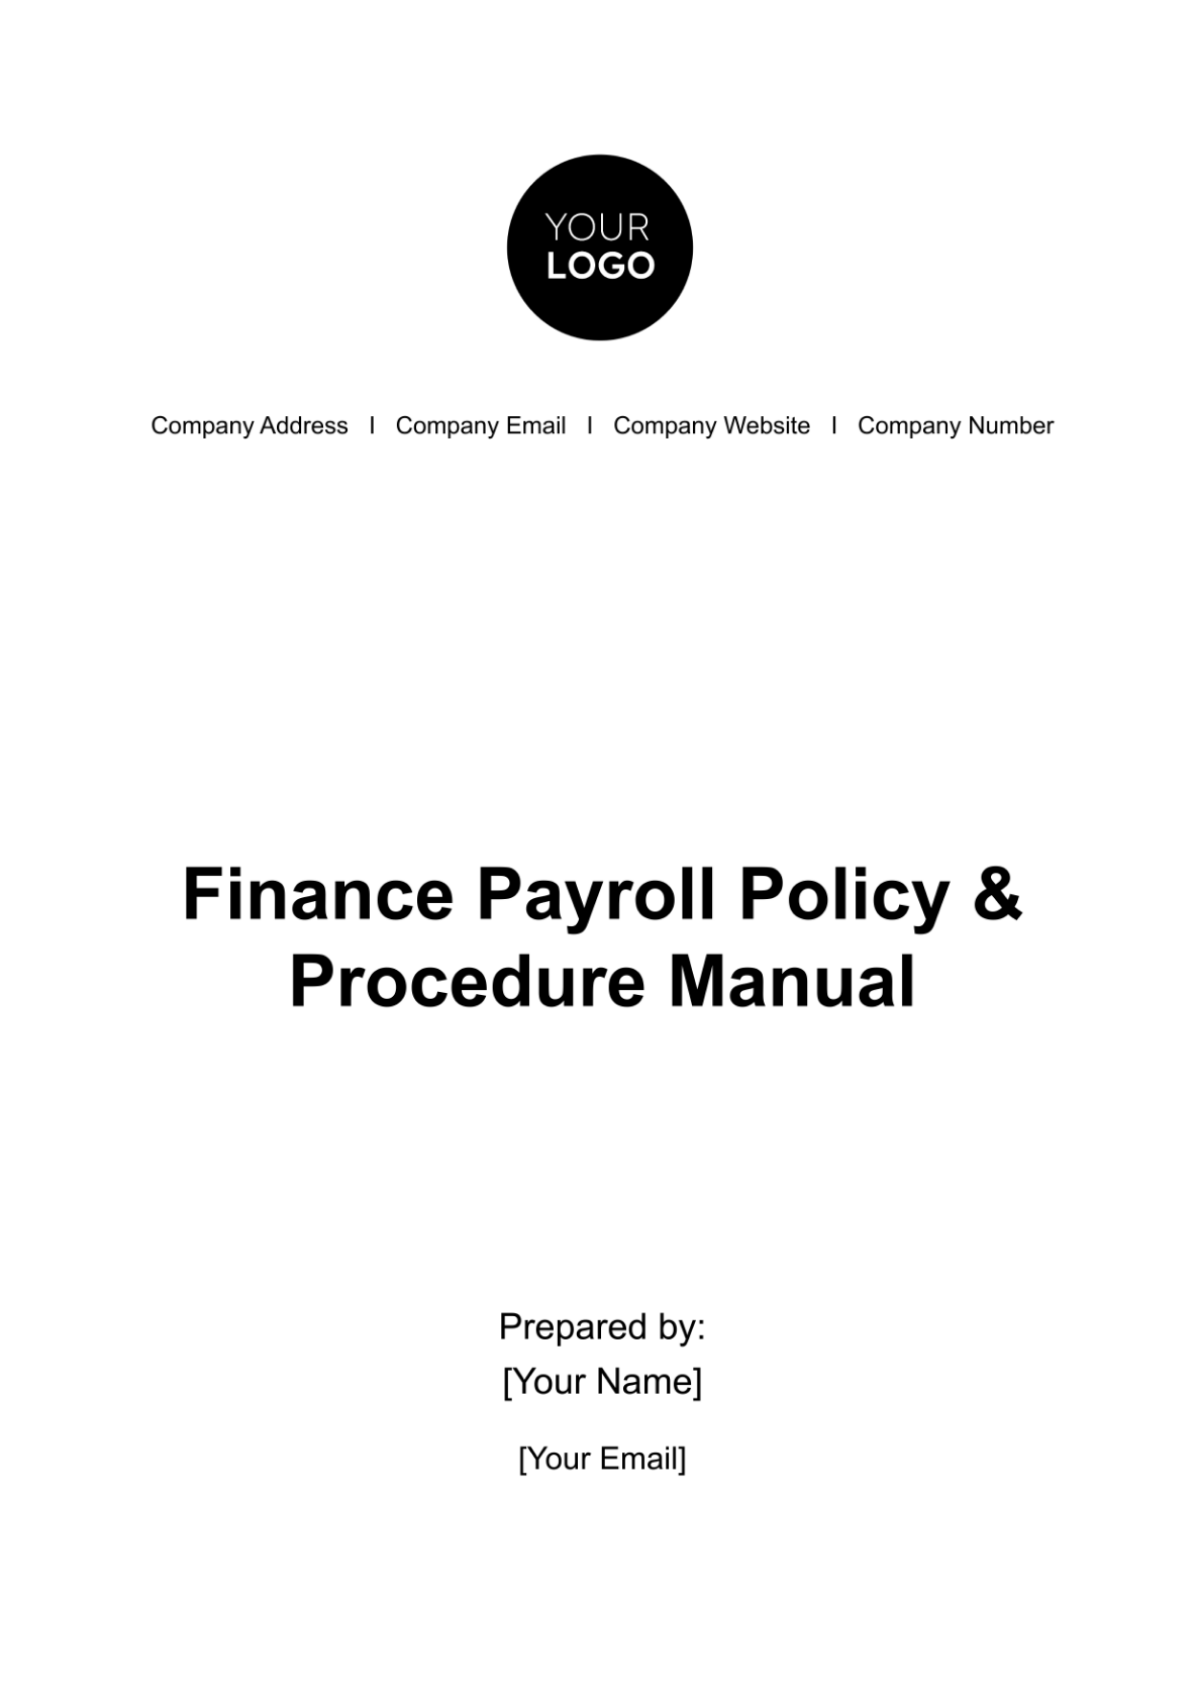 Free Finance Payroll Policy & Procedure Manual Template